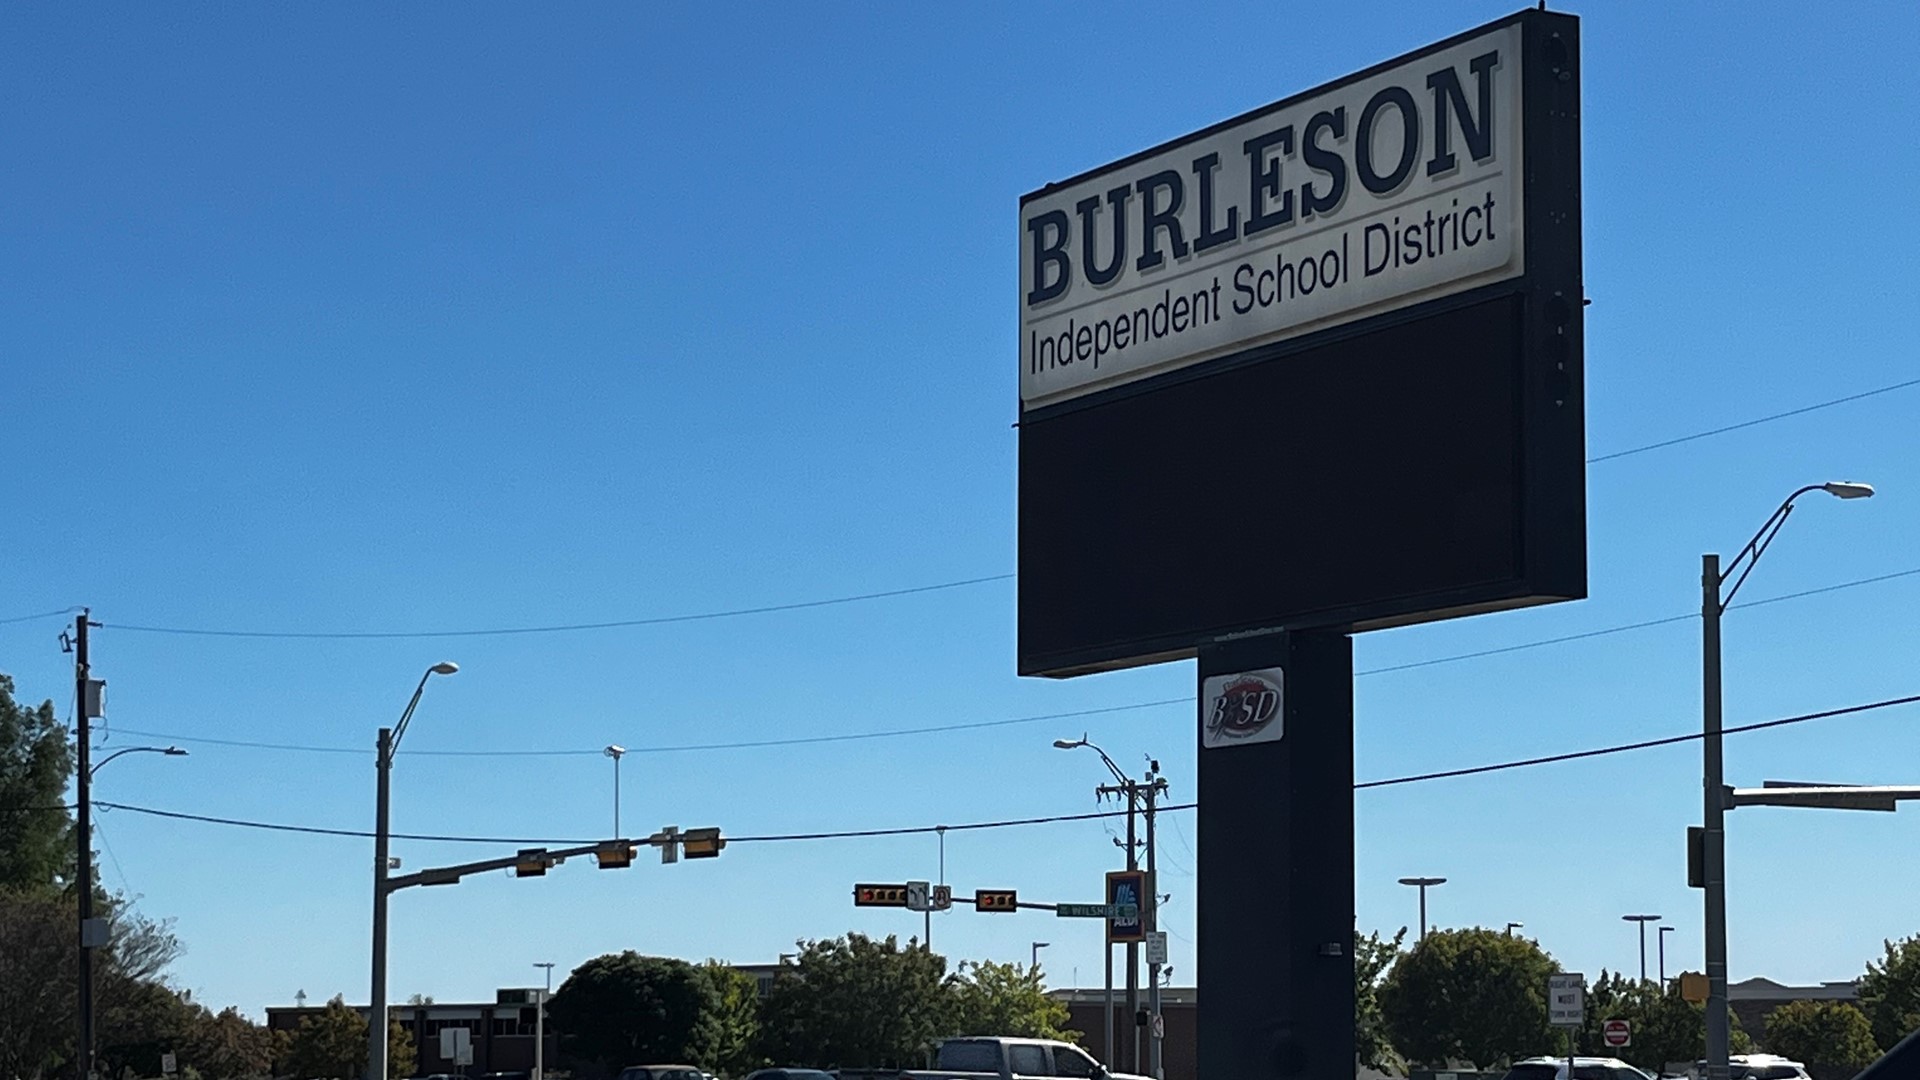 Burleson administrators said they have opened an investigation, removed both the assistant and head coach, reported the matter to police and contacted parents.